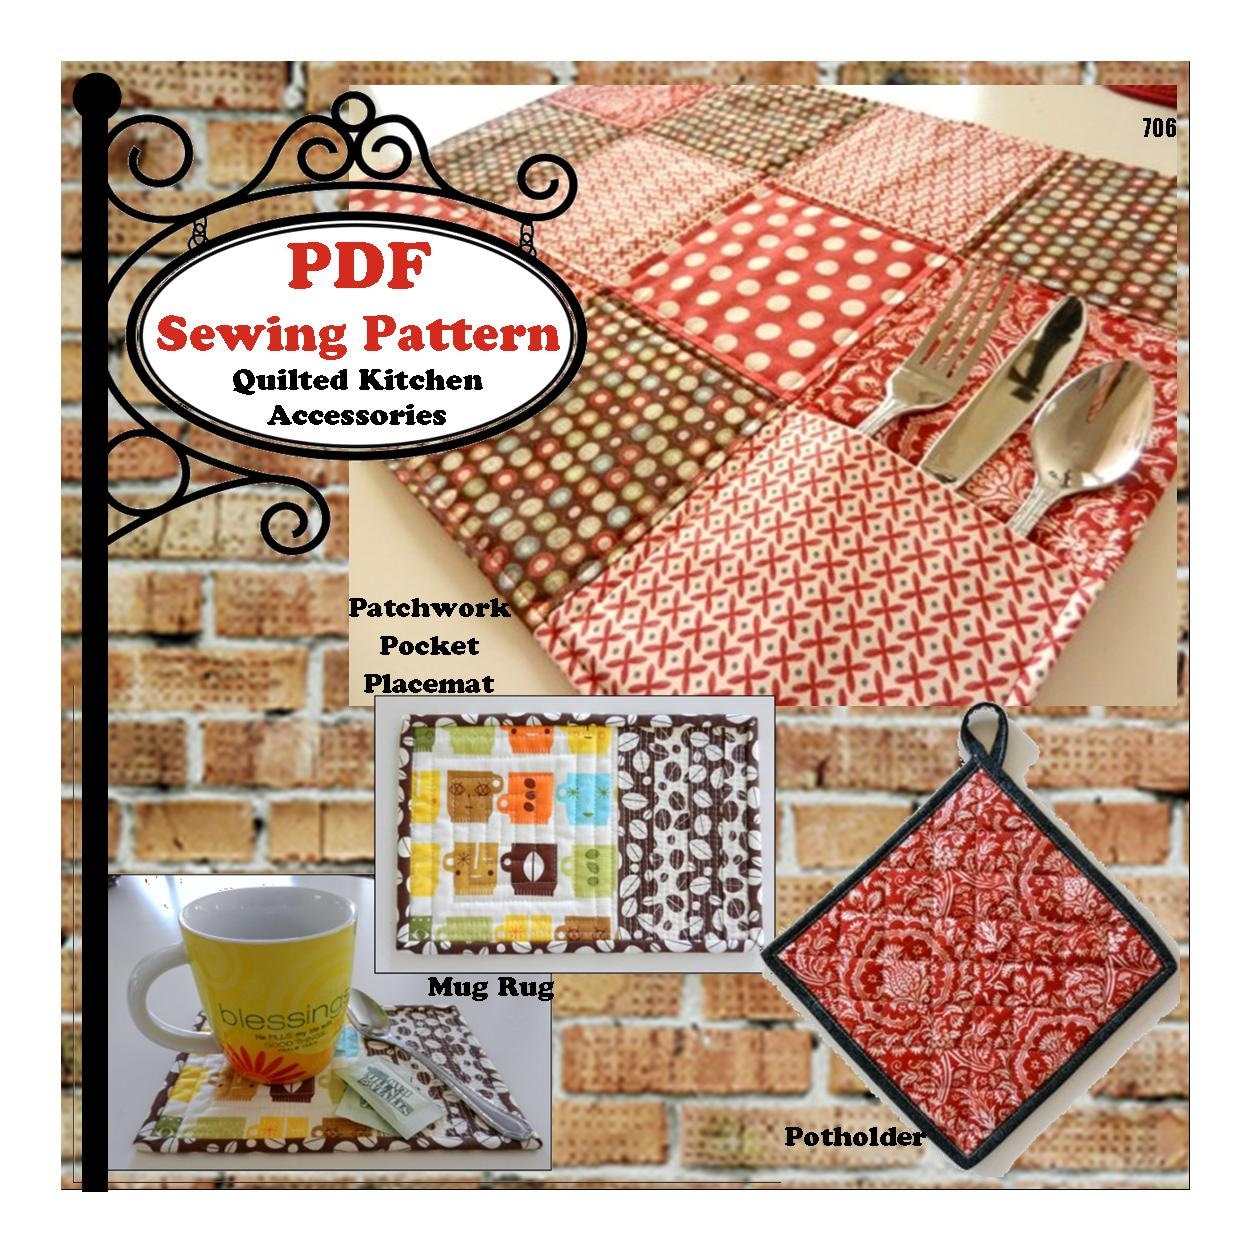 Quilted Kitchen Accessories PDF Sewing by MaggieElizDesigns